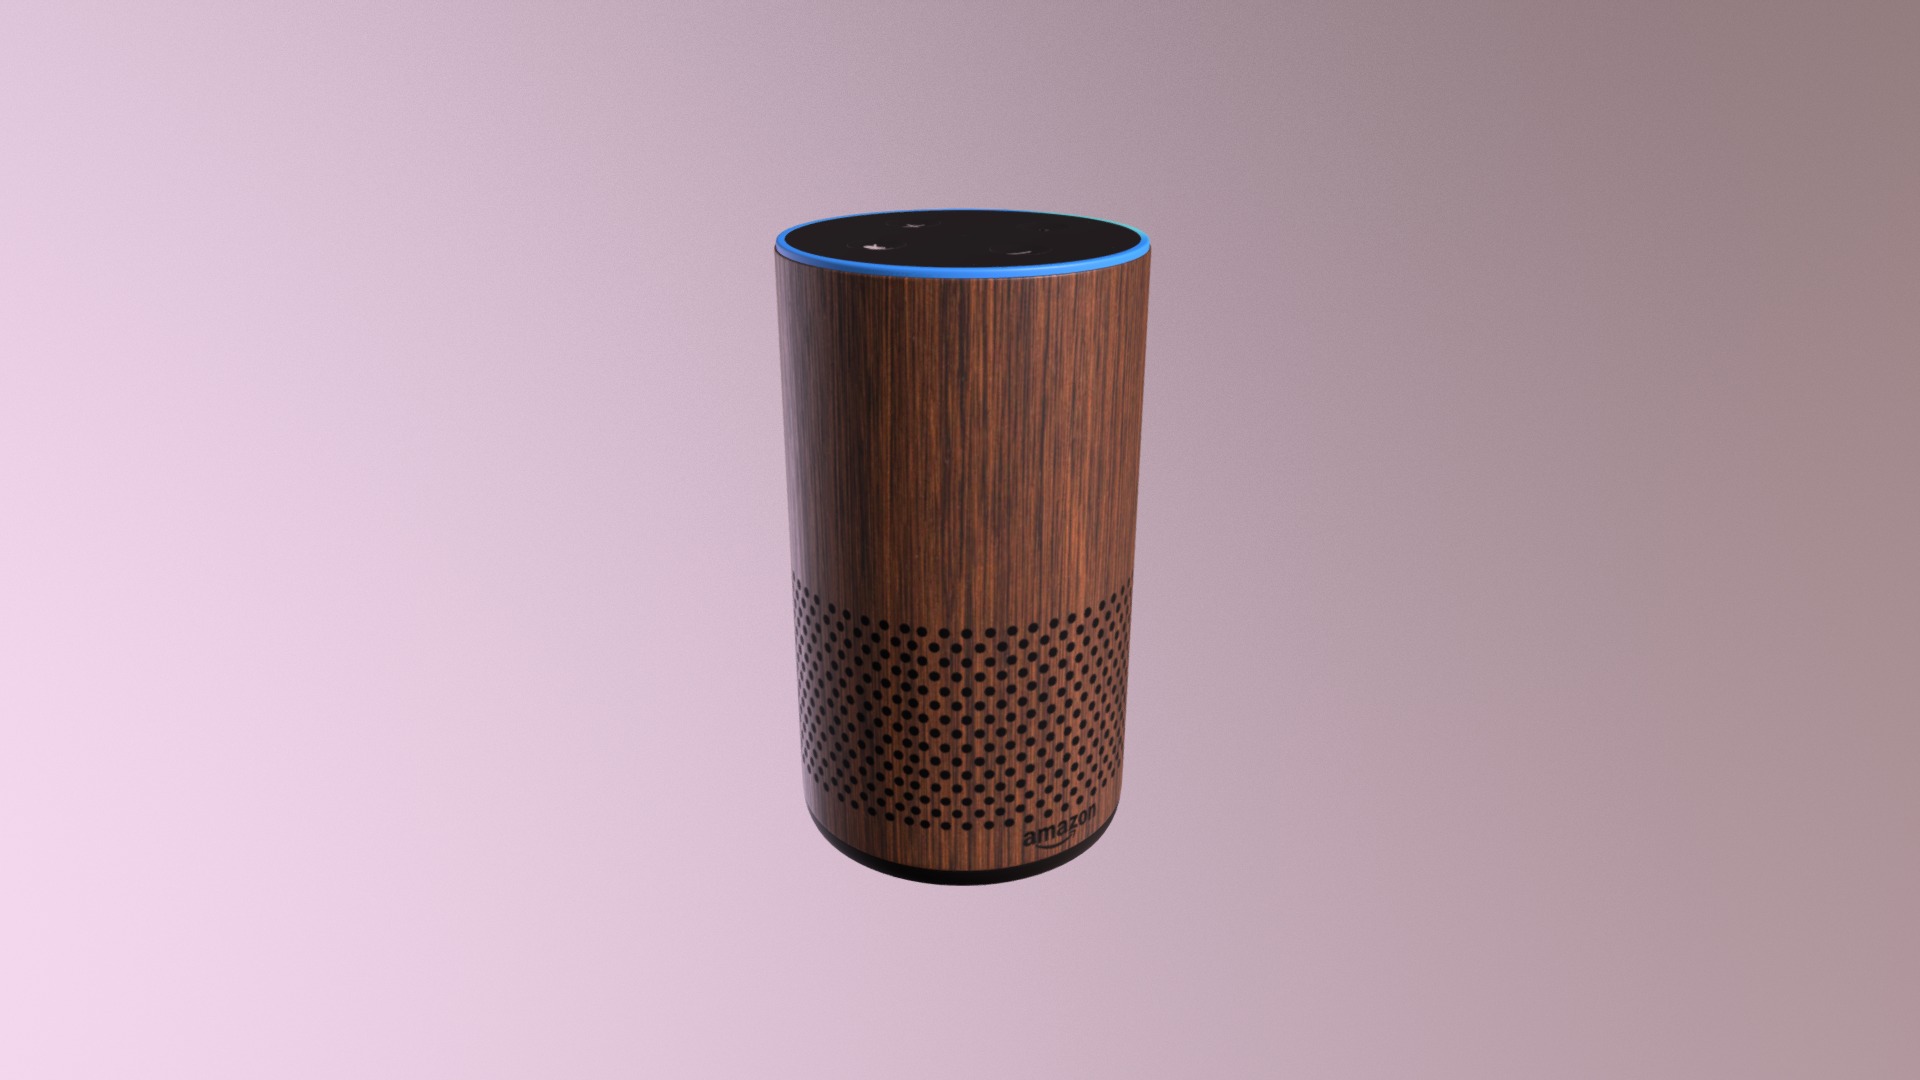 3D model Amazon Echo New Walnut - This is a 3D model of the Amazon Echo New Walnut. The 3D model is about a cylindrical object with a blue top.